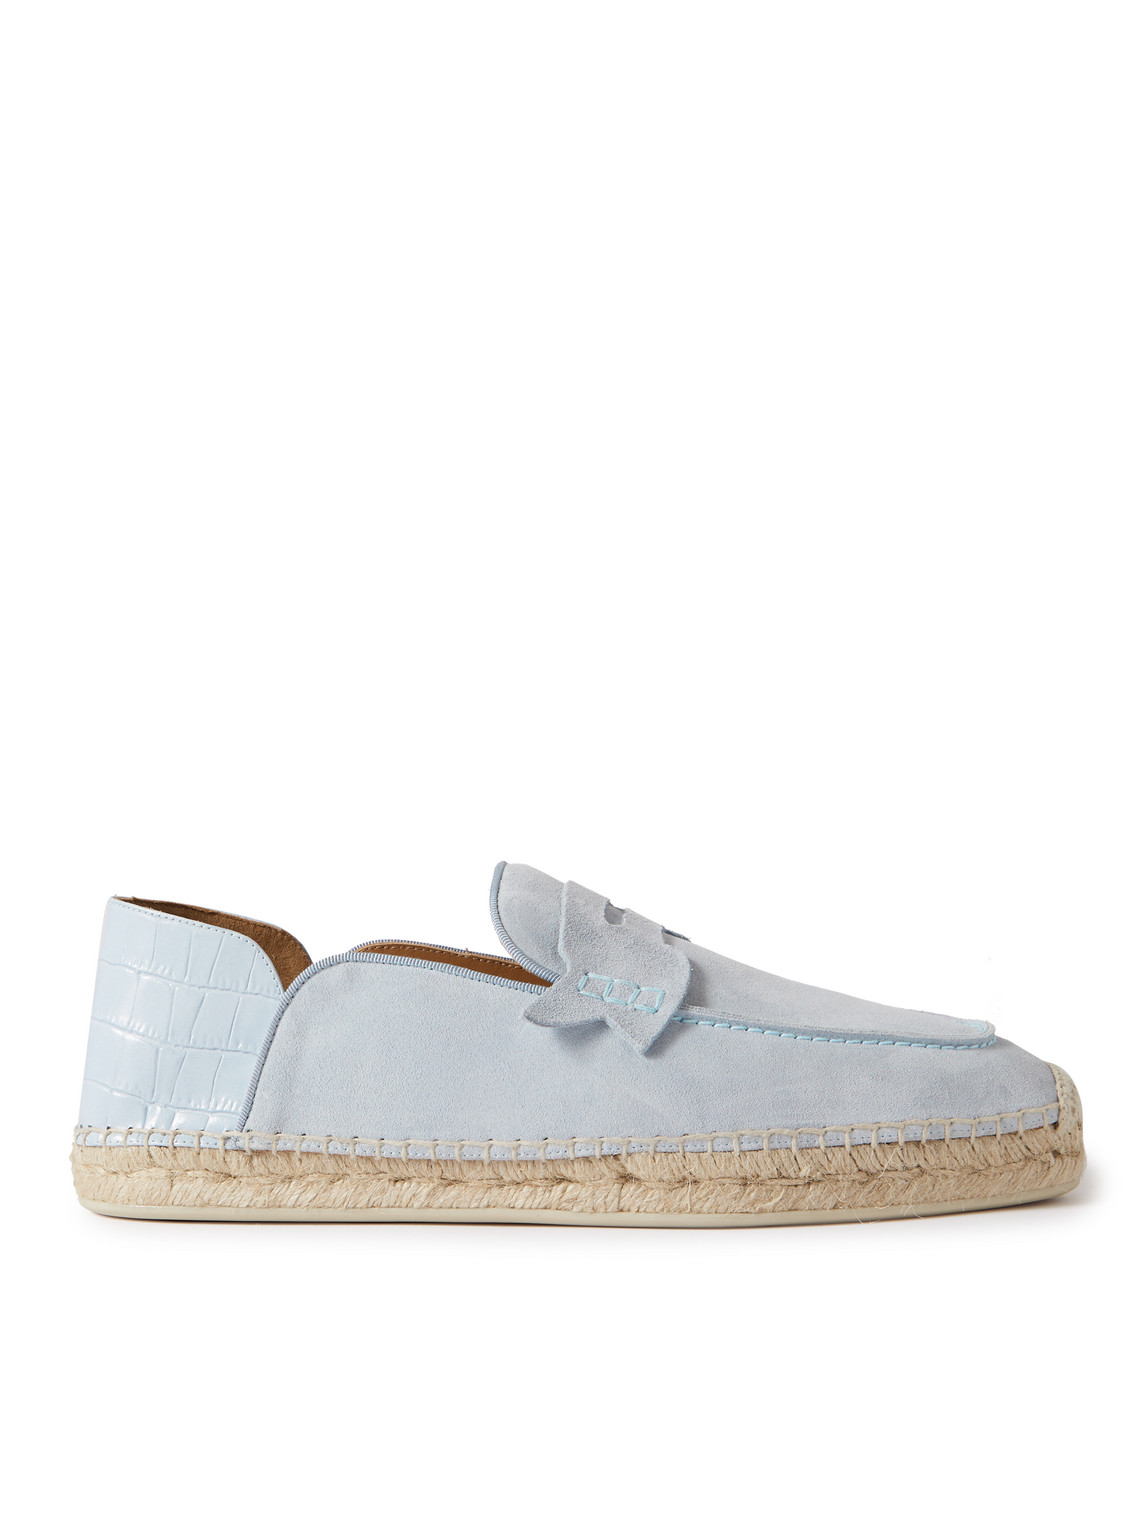 Christian Louboutin Mens Paseo Paquepapa Loafer-style Suede And Croc-embossed Leather Espadrilles